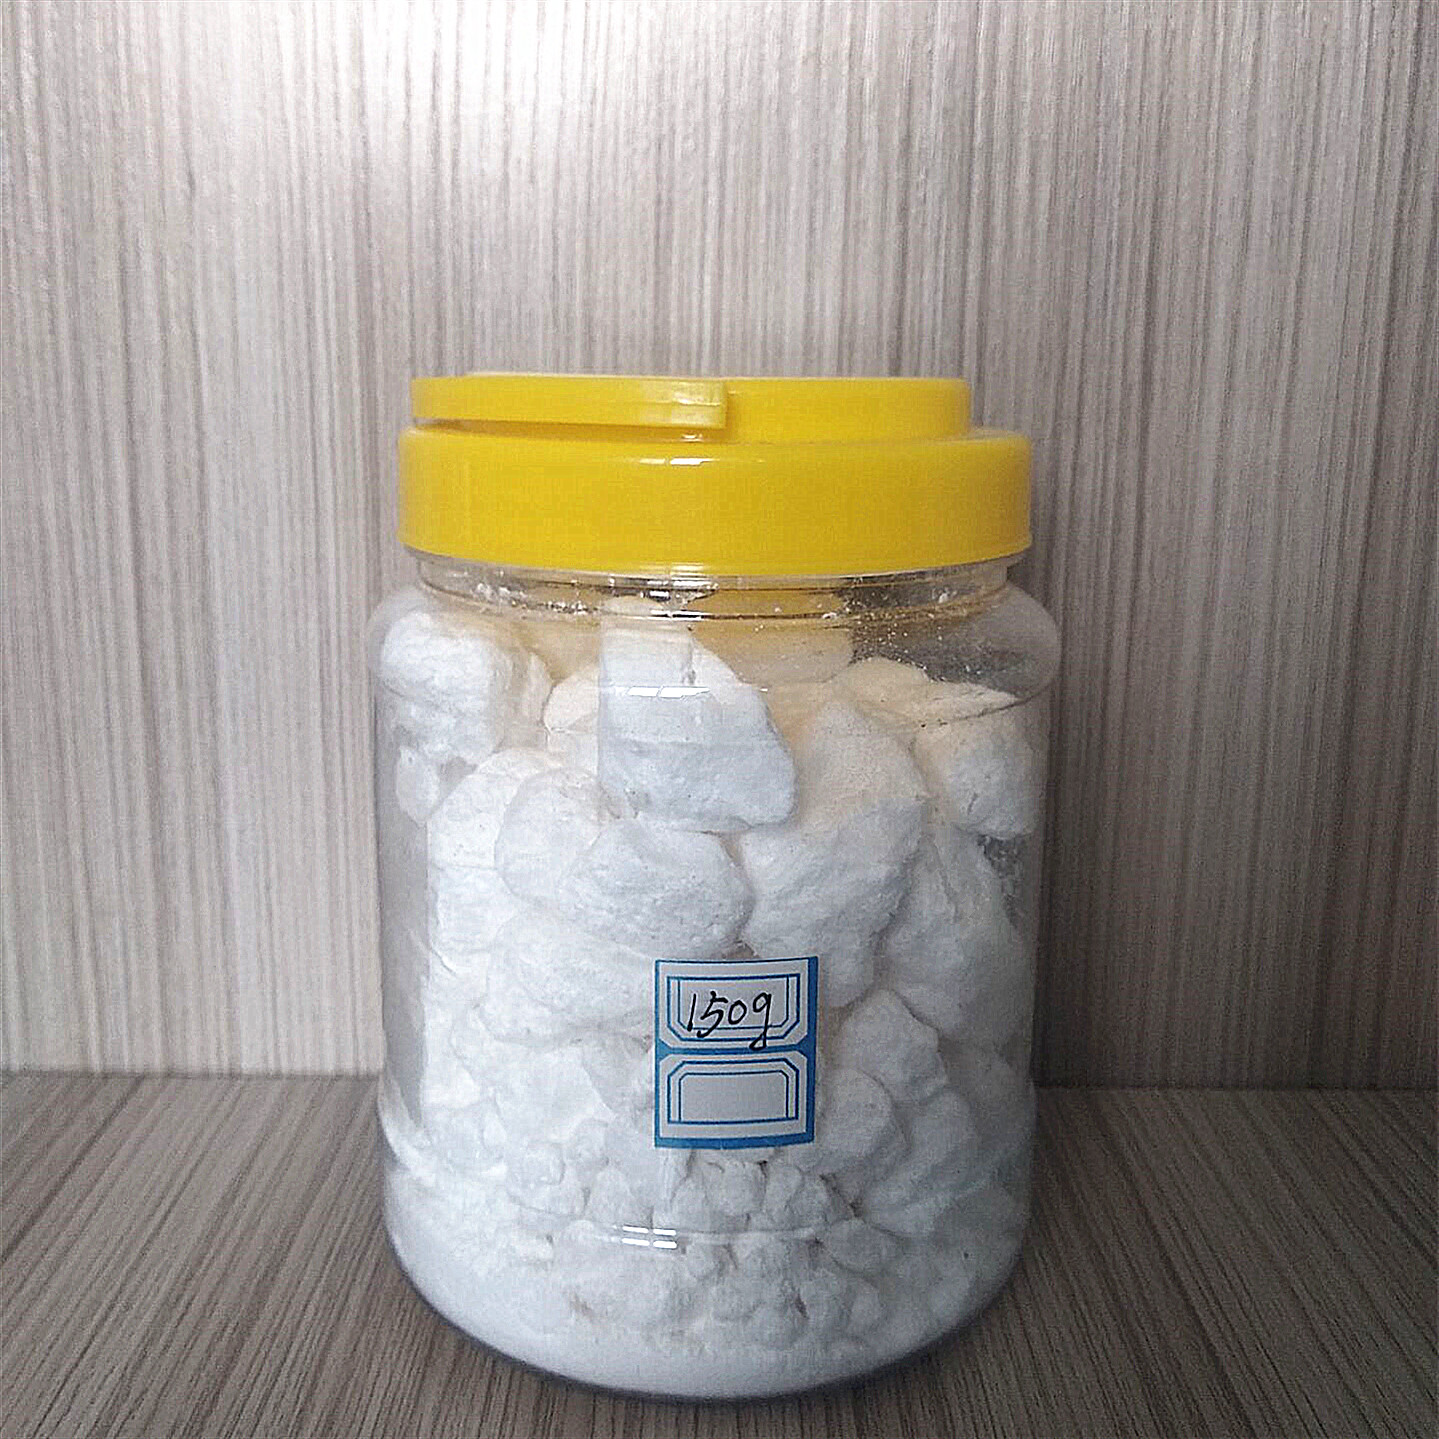 Wholesale 300g (10.58 oz) Loose Gym Chalk for Climbing 